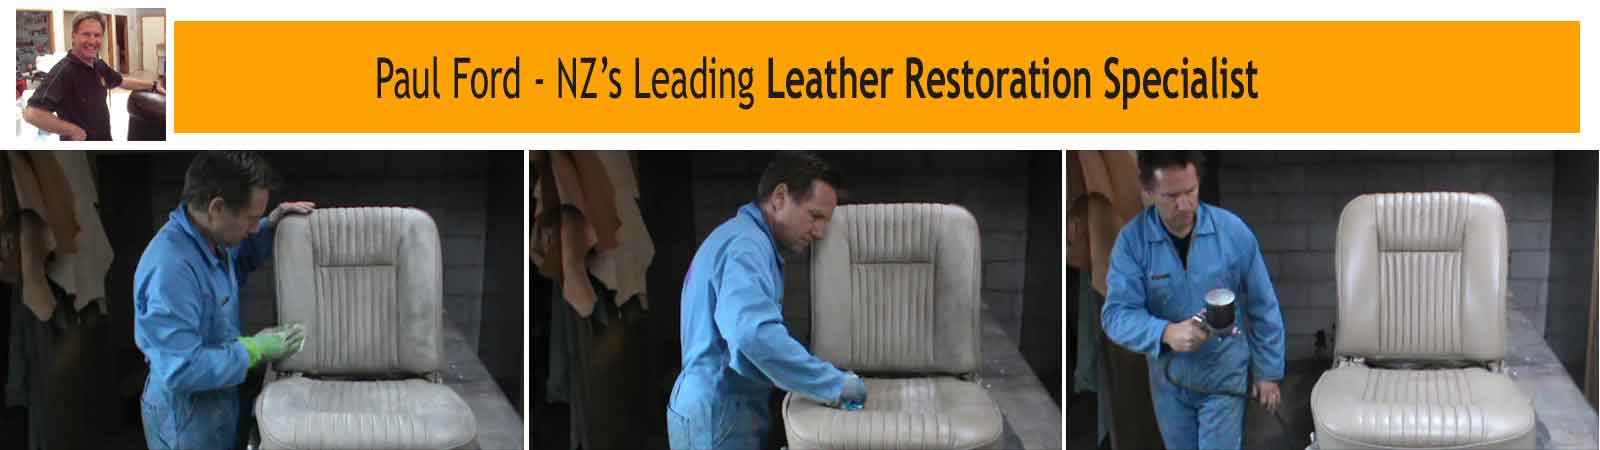 Leather repair and restoration specialist Paul Ford